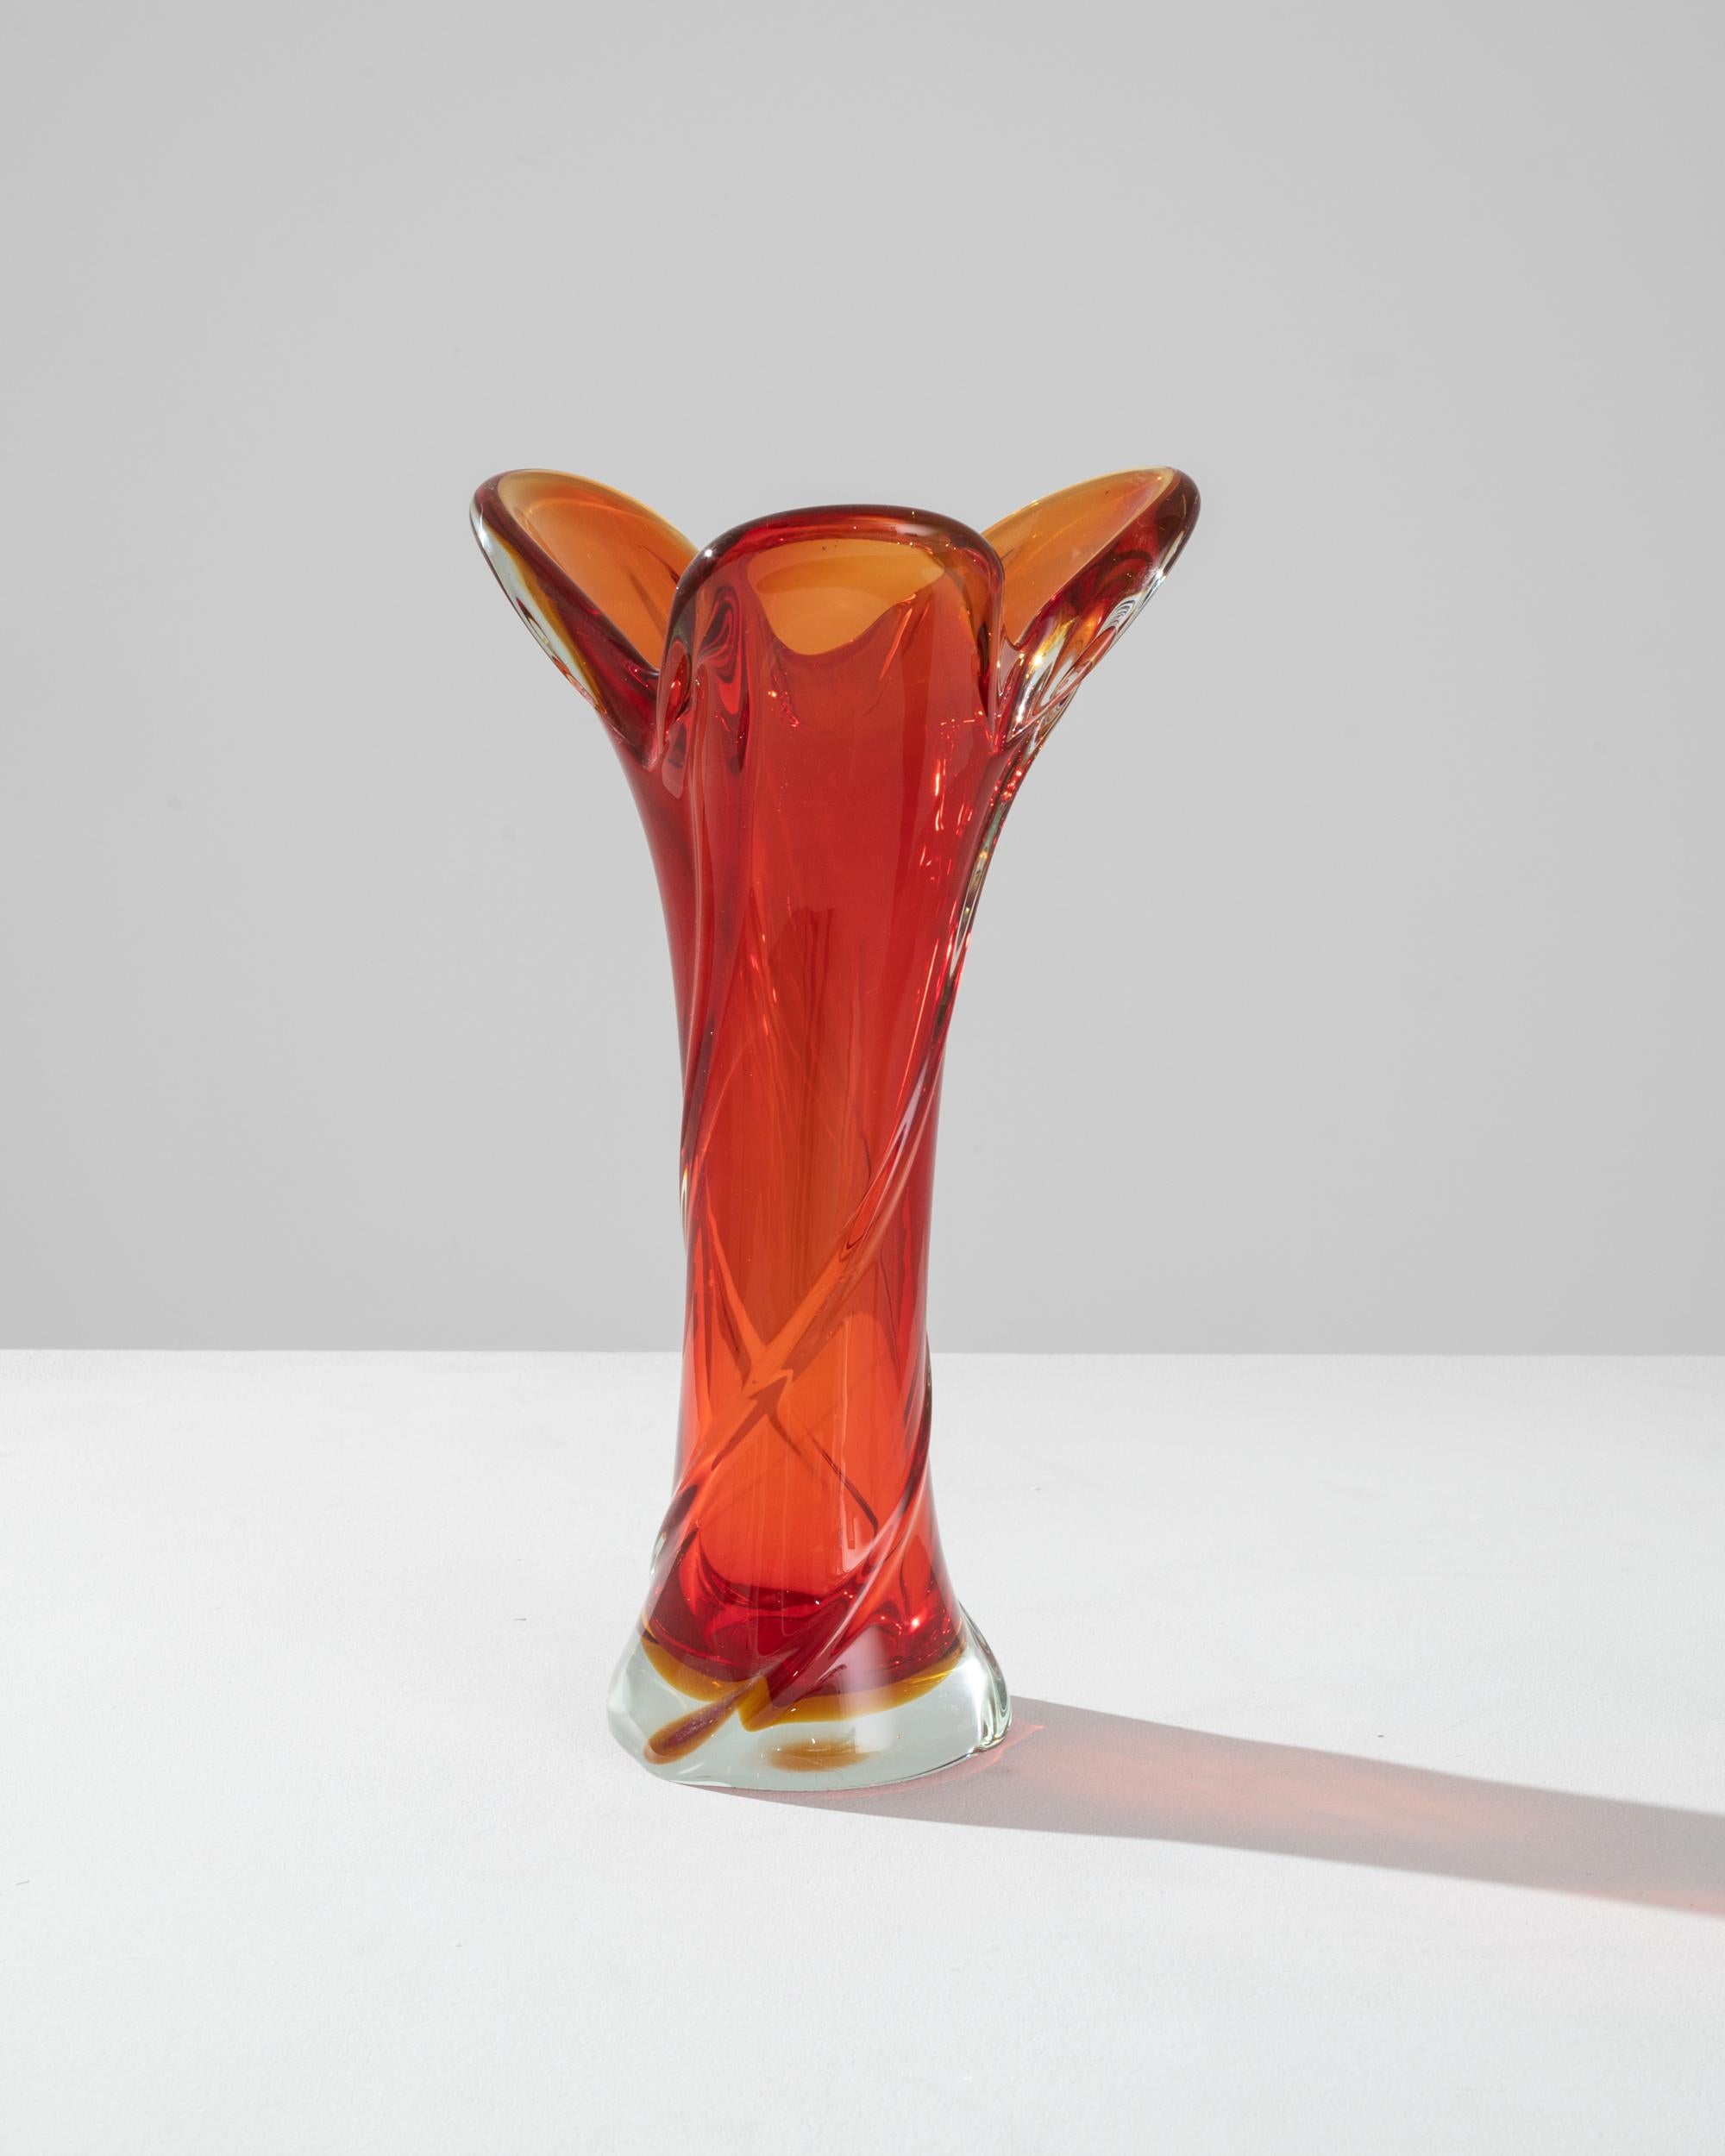 The vivid hues and liquid lines of blown art glass create an unmissable accent. Made in Belgium circa 1960, expressive glasswork forms a bold silhouette. Organic and abstract, reminiscent of cascading water captured in slow motion. A luminous